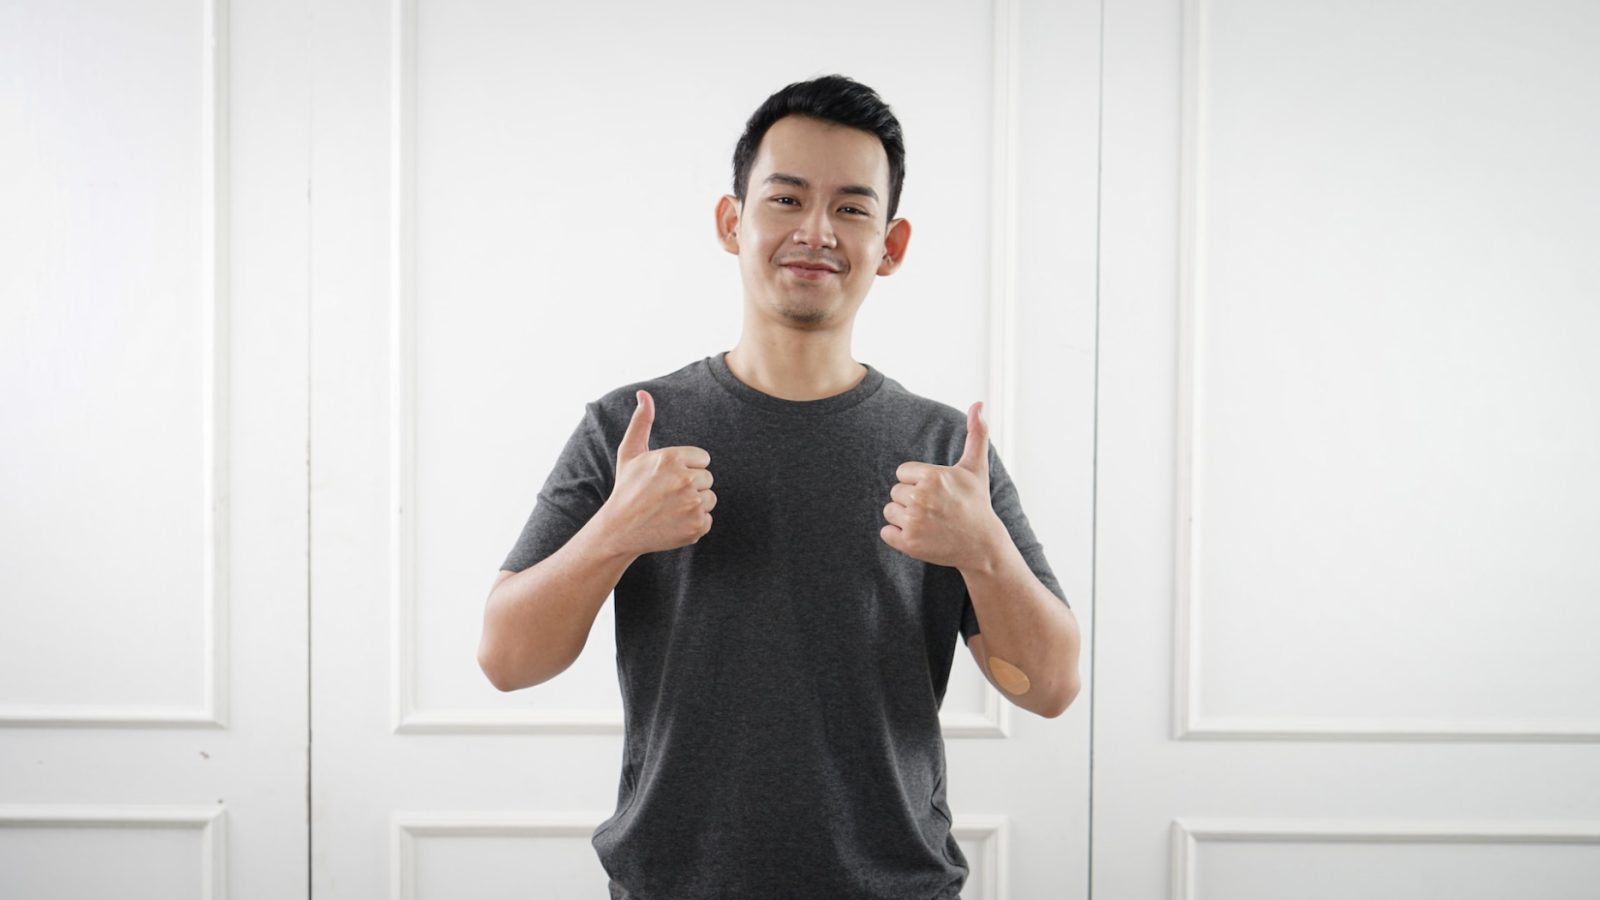 Man standing with a thumbs-up